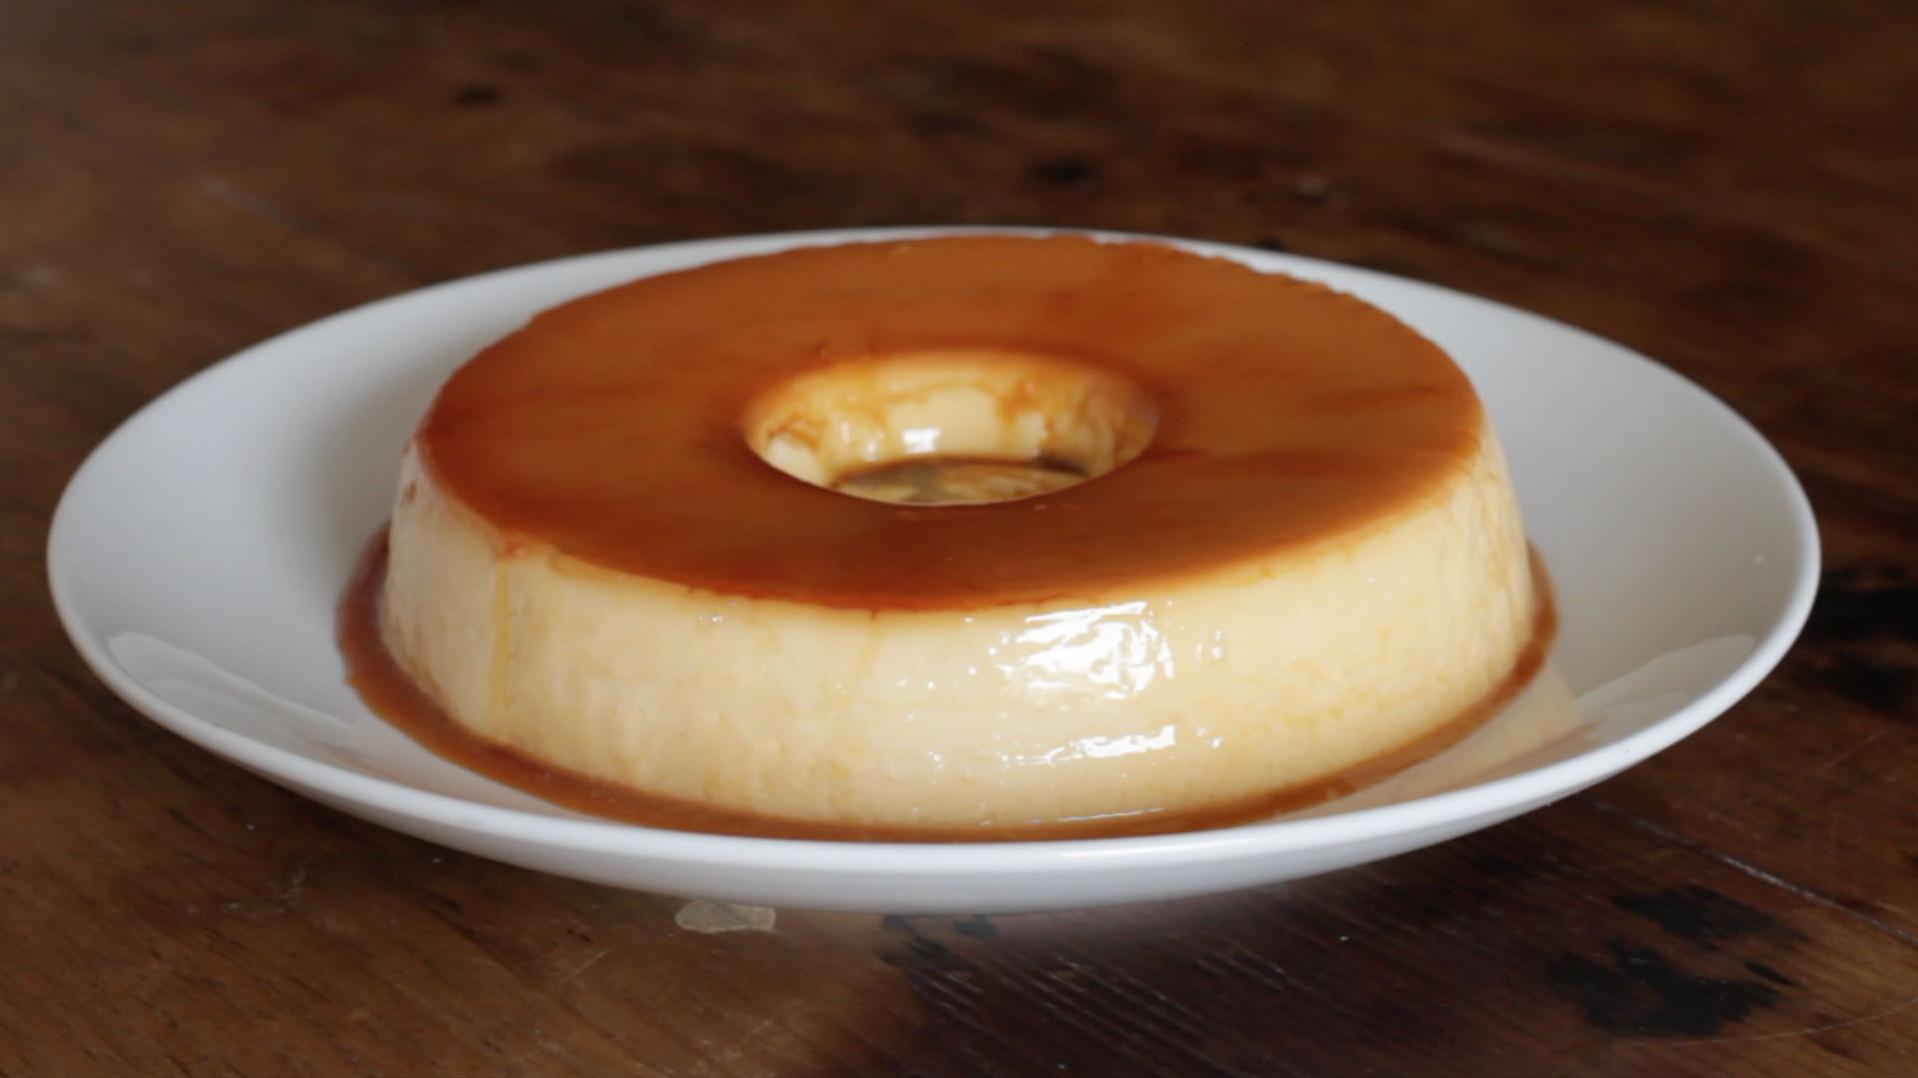  In this recipe, I will show you how to make the perfect Brazilian milk pudding from scratch.